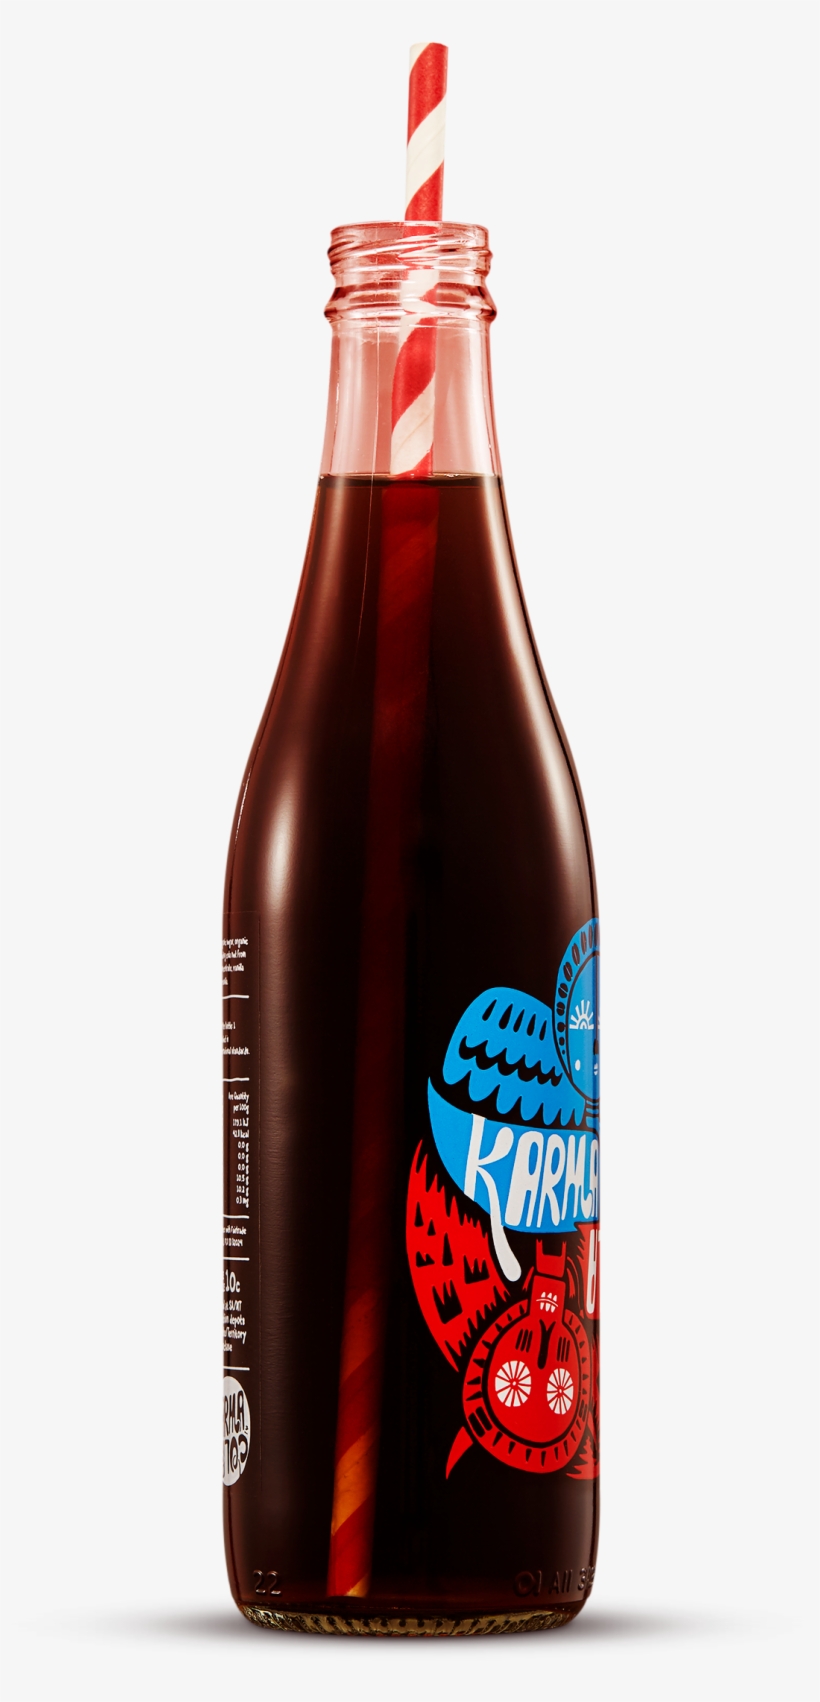 Less Sugar Than Most Other Fizzy Drinks - Karma Cola, transparent png #3148319